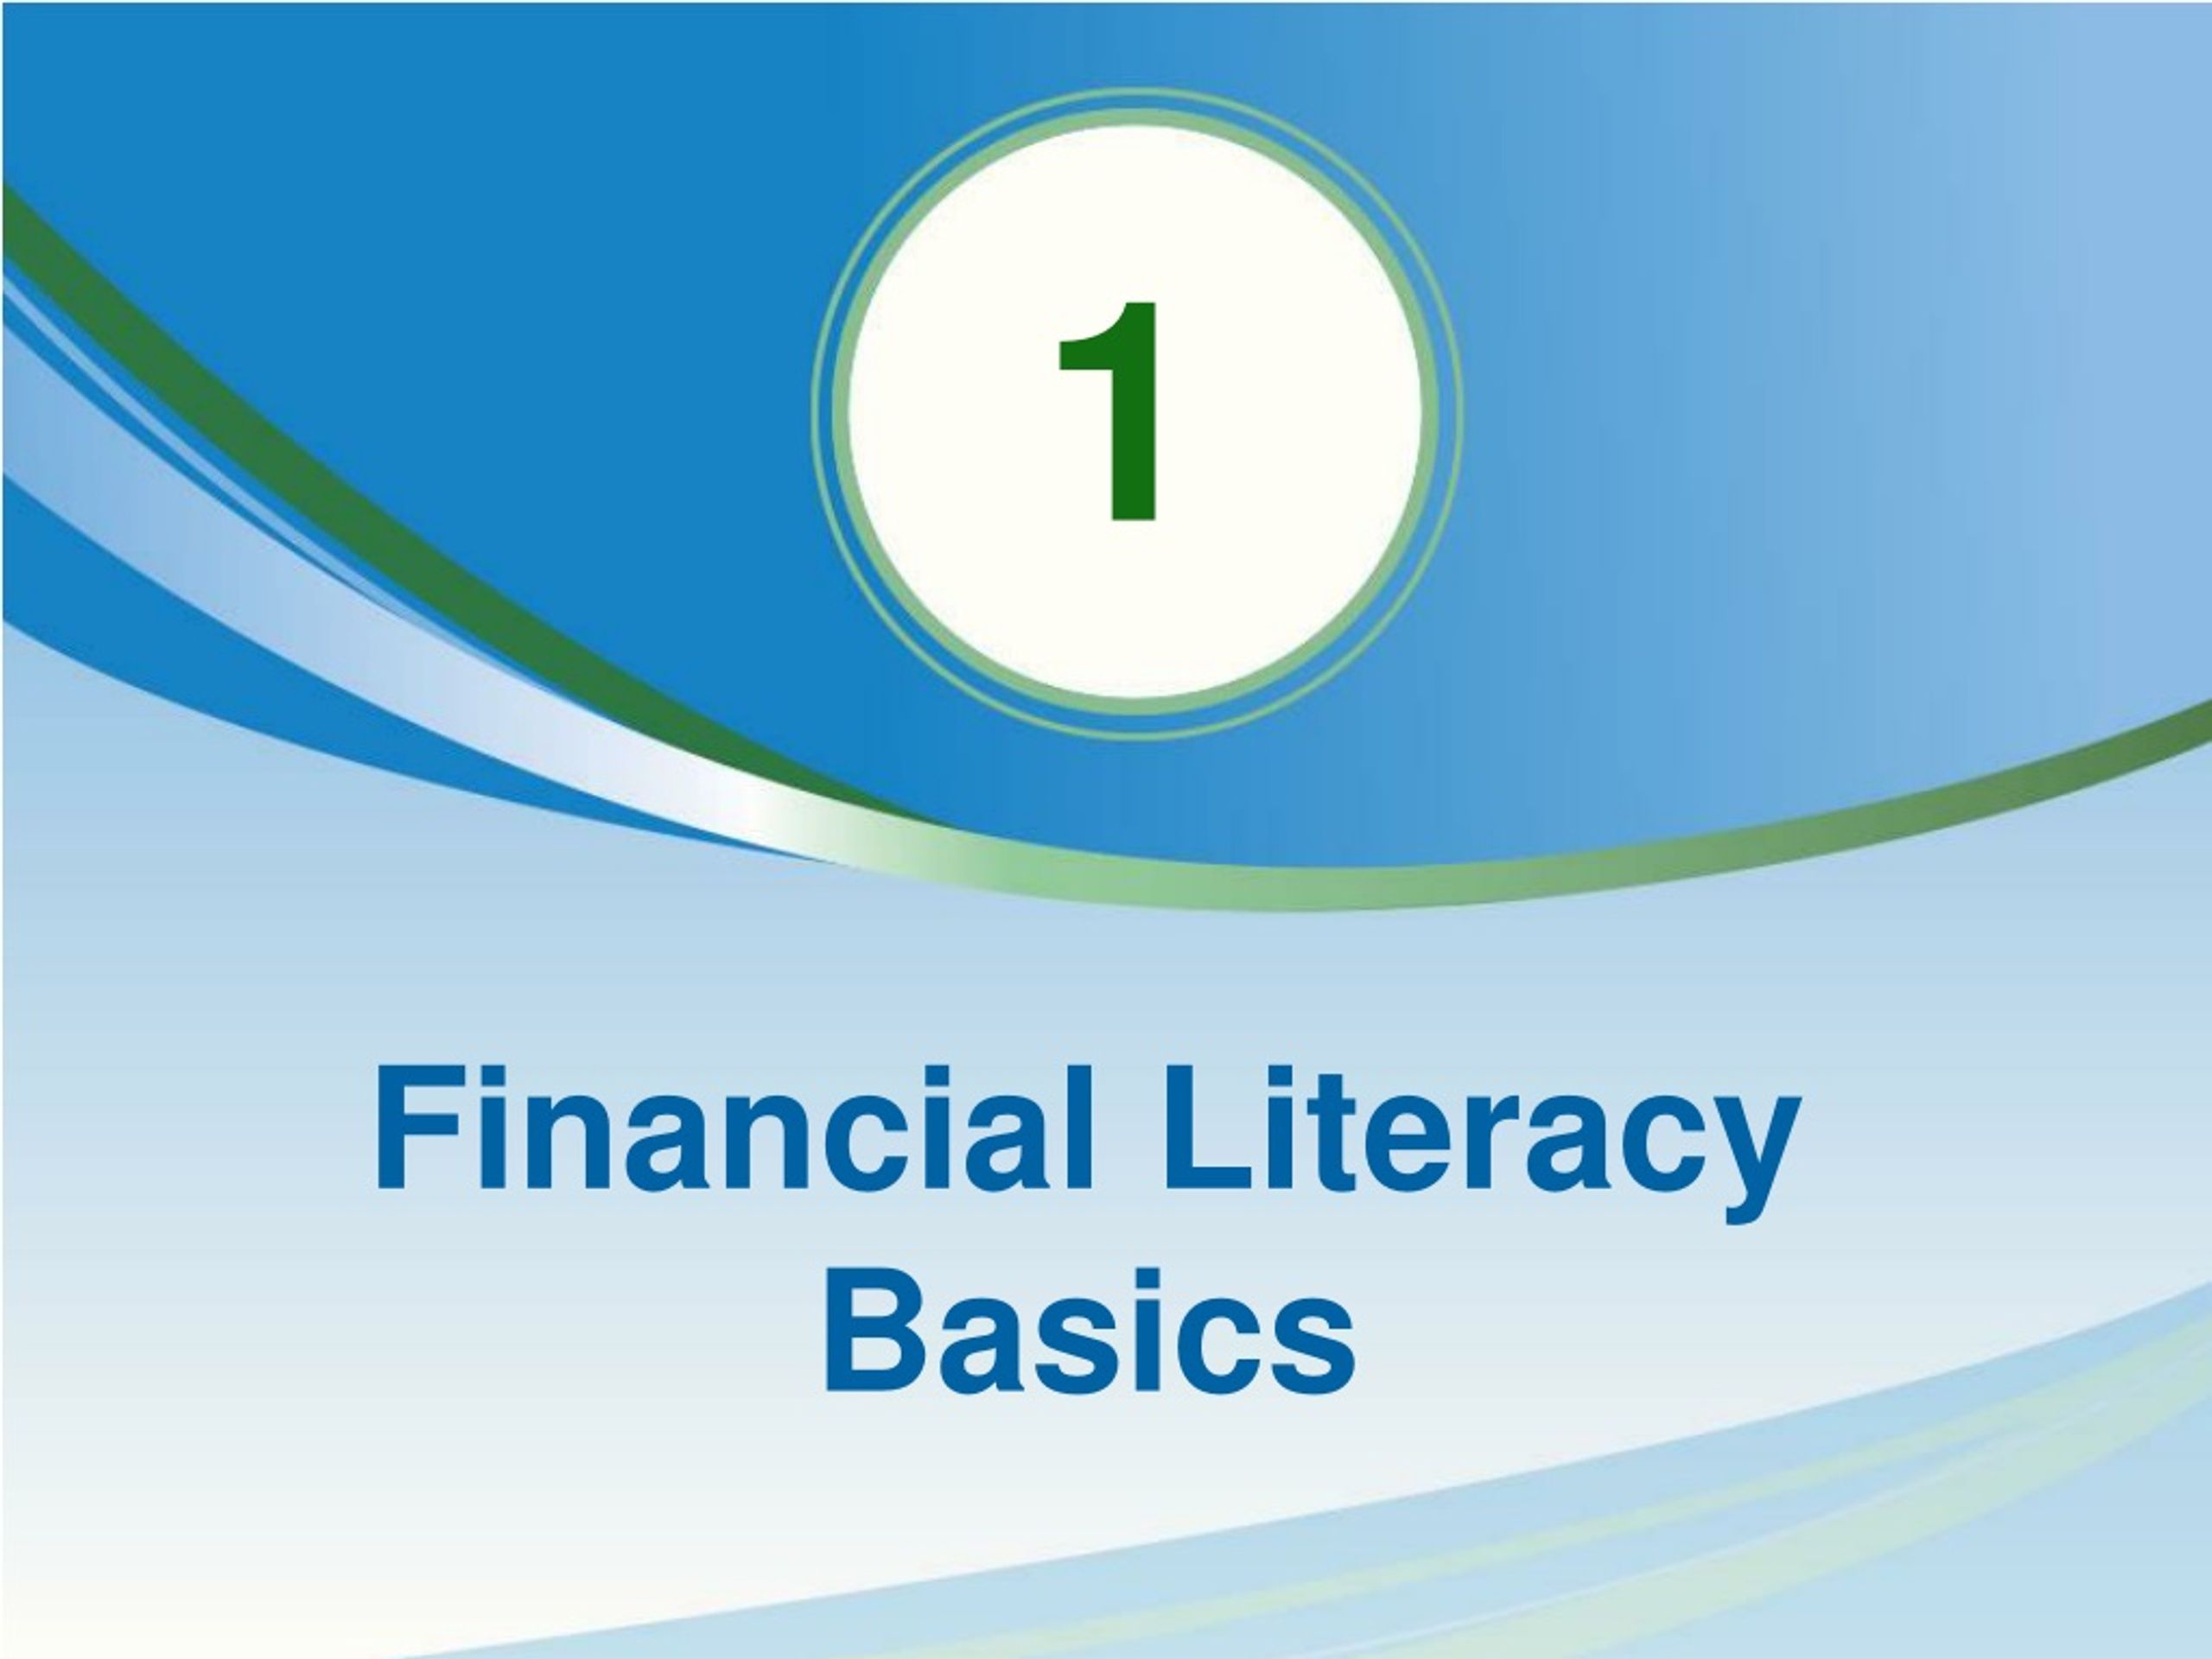 PPT Financial Literacy Basics PowerPoint Presentation, free download